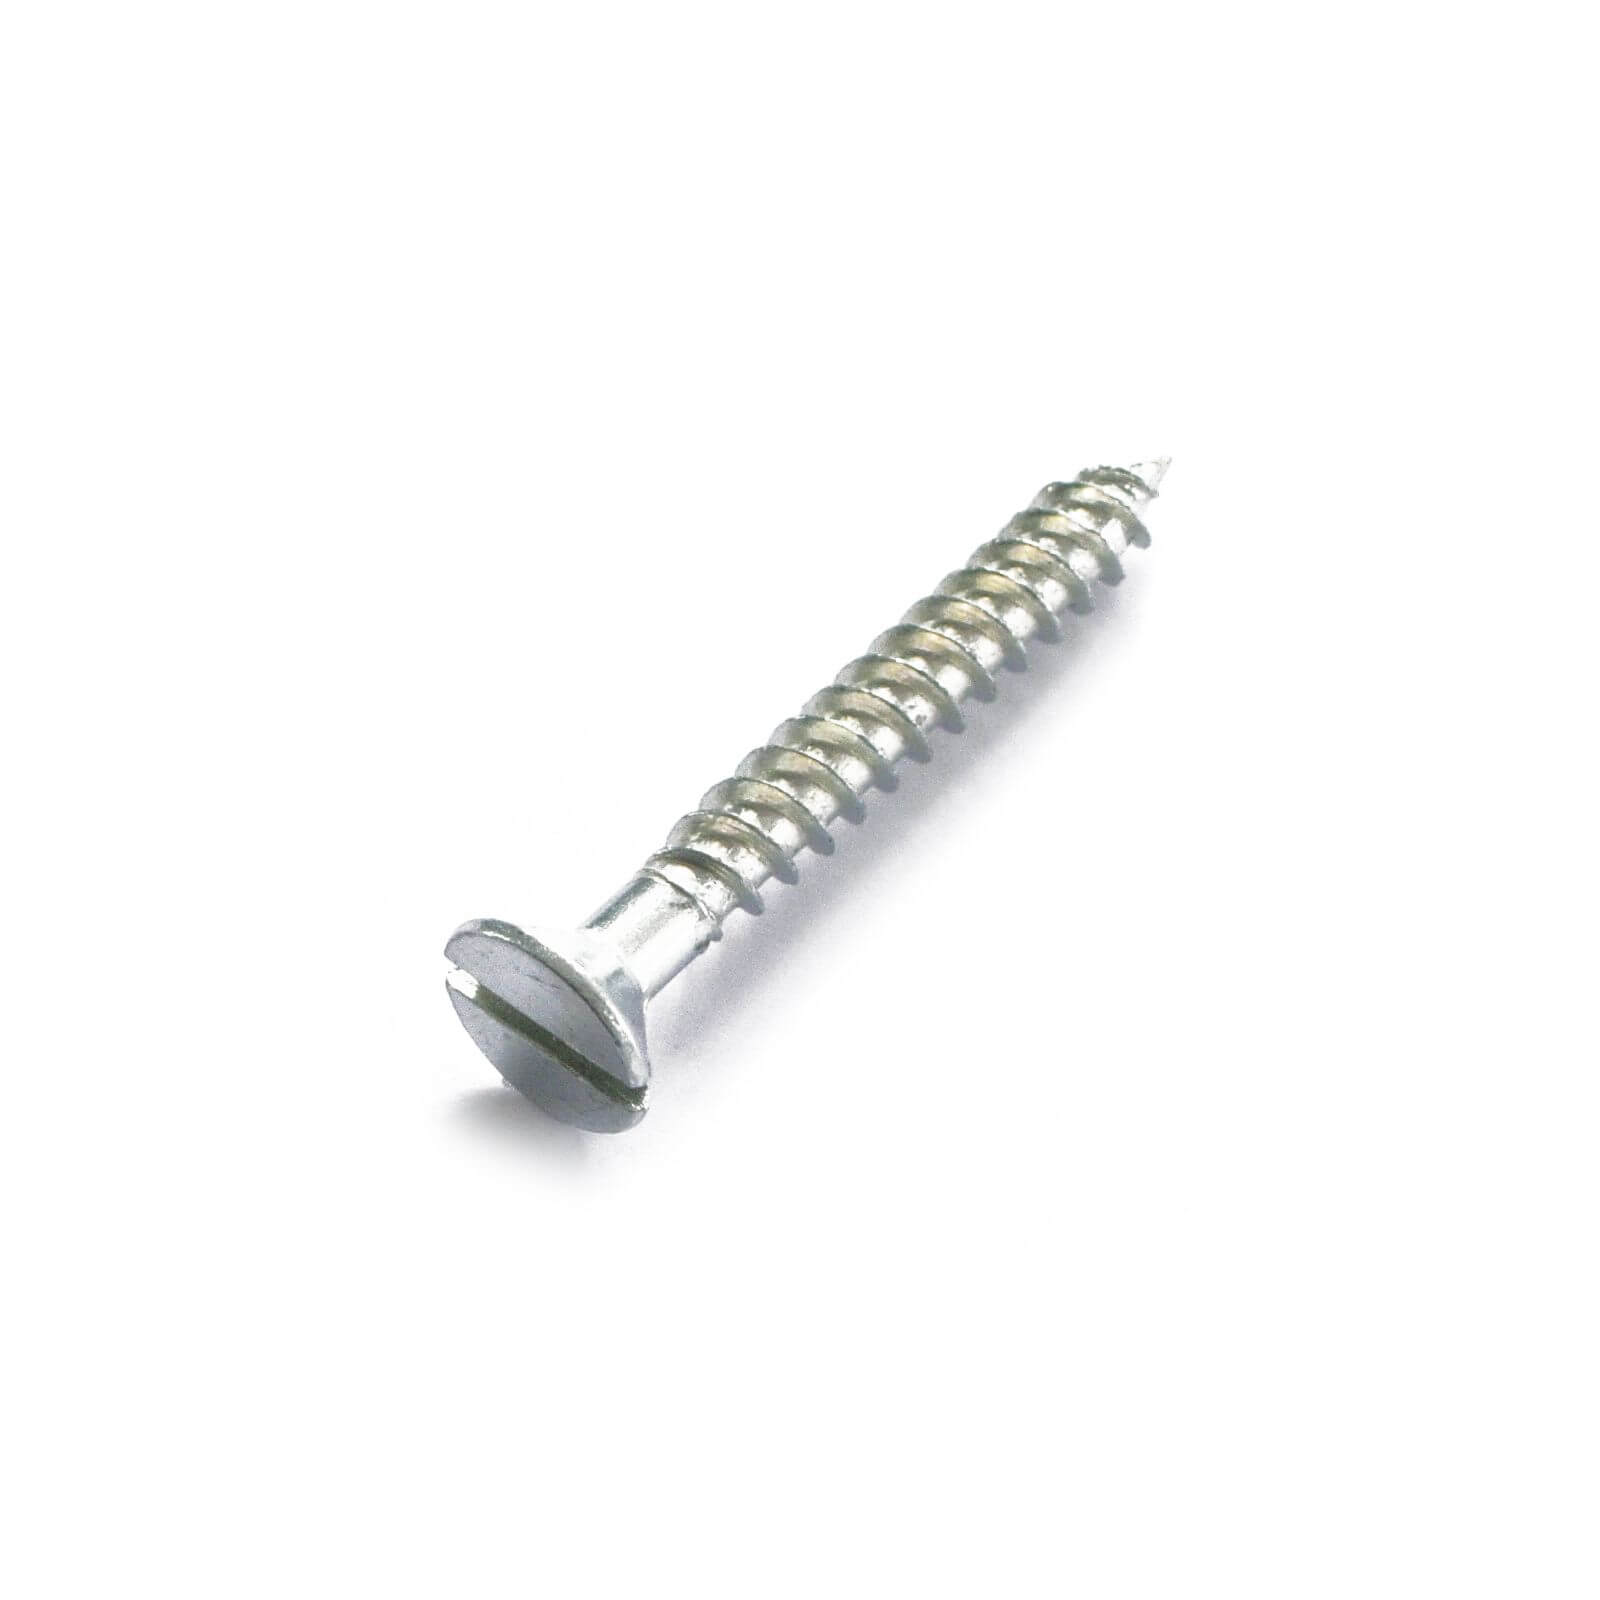 Wood Screw - Countersunk - Bright Zinc Plated - 4 x 30mm - 10 Pack